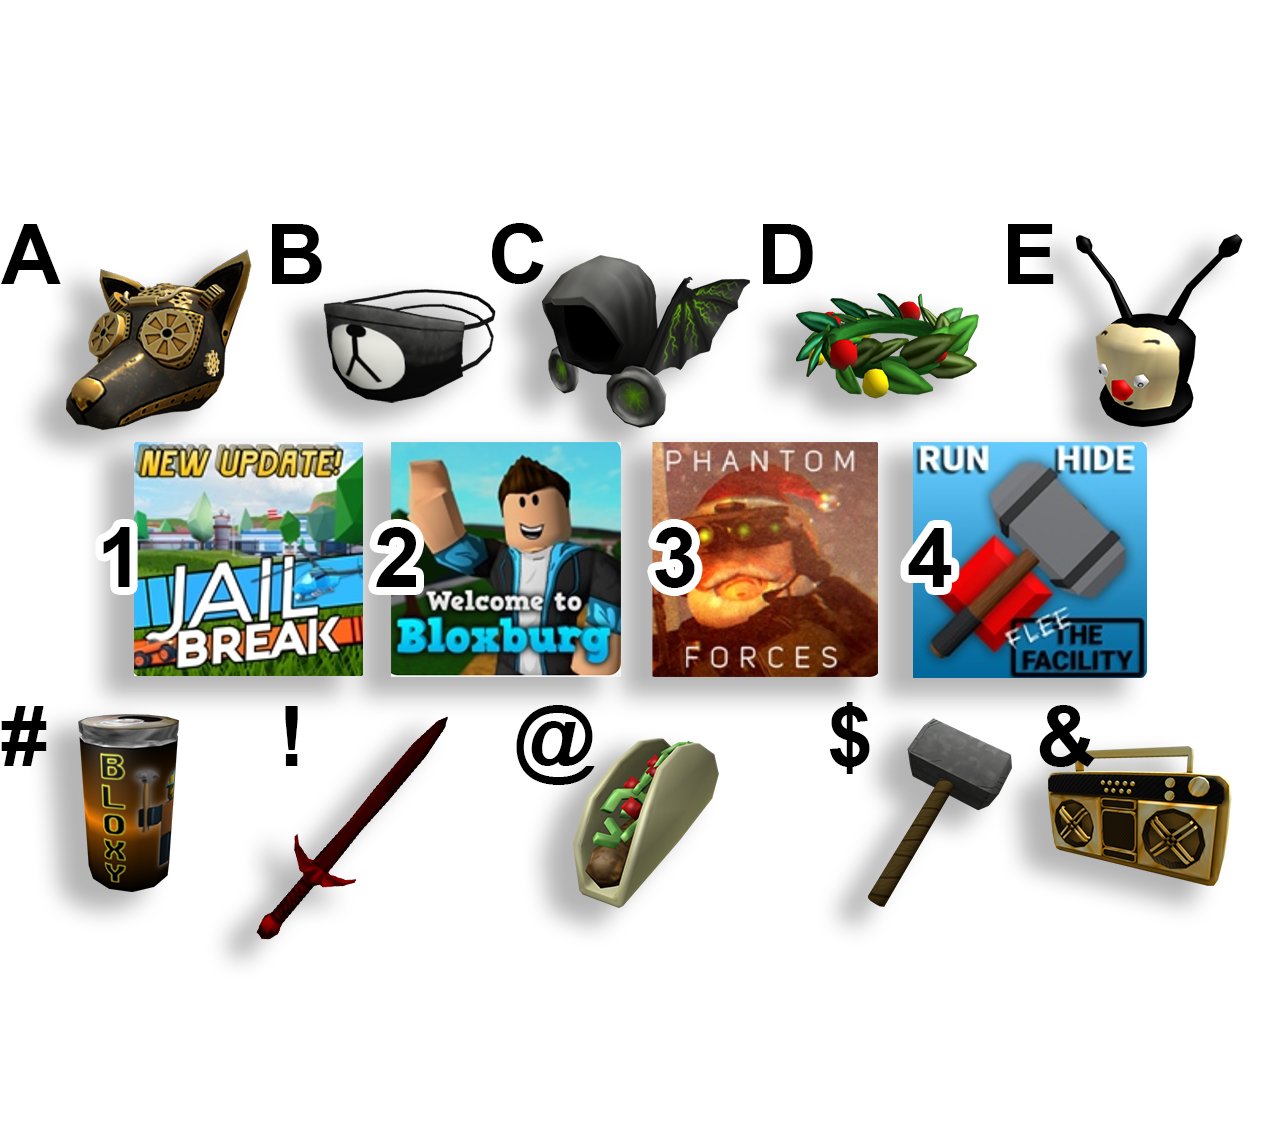 Roblox On Twitter Which Combo Are You Picking For The Ultimate Roblox Experience - roblox on twitter wherever you are heres to a day filled